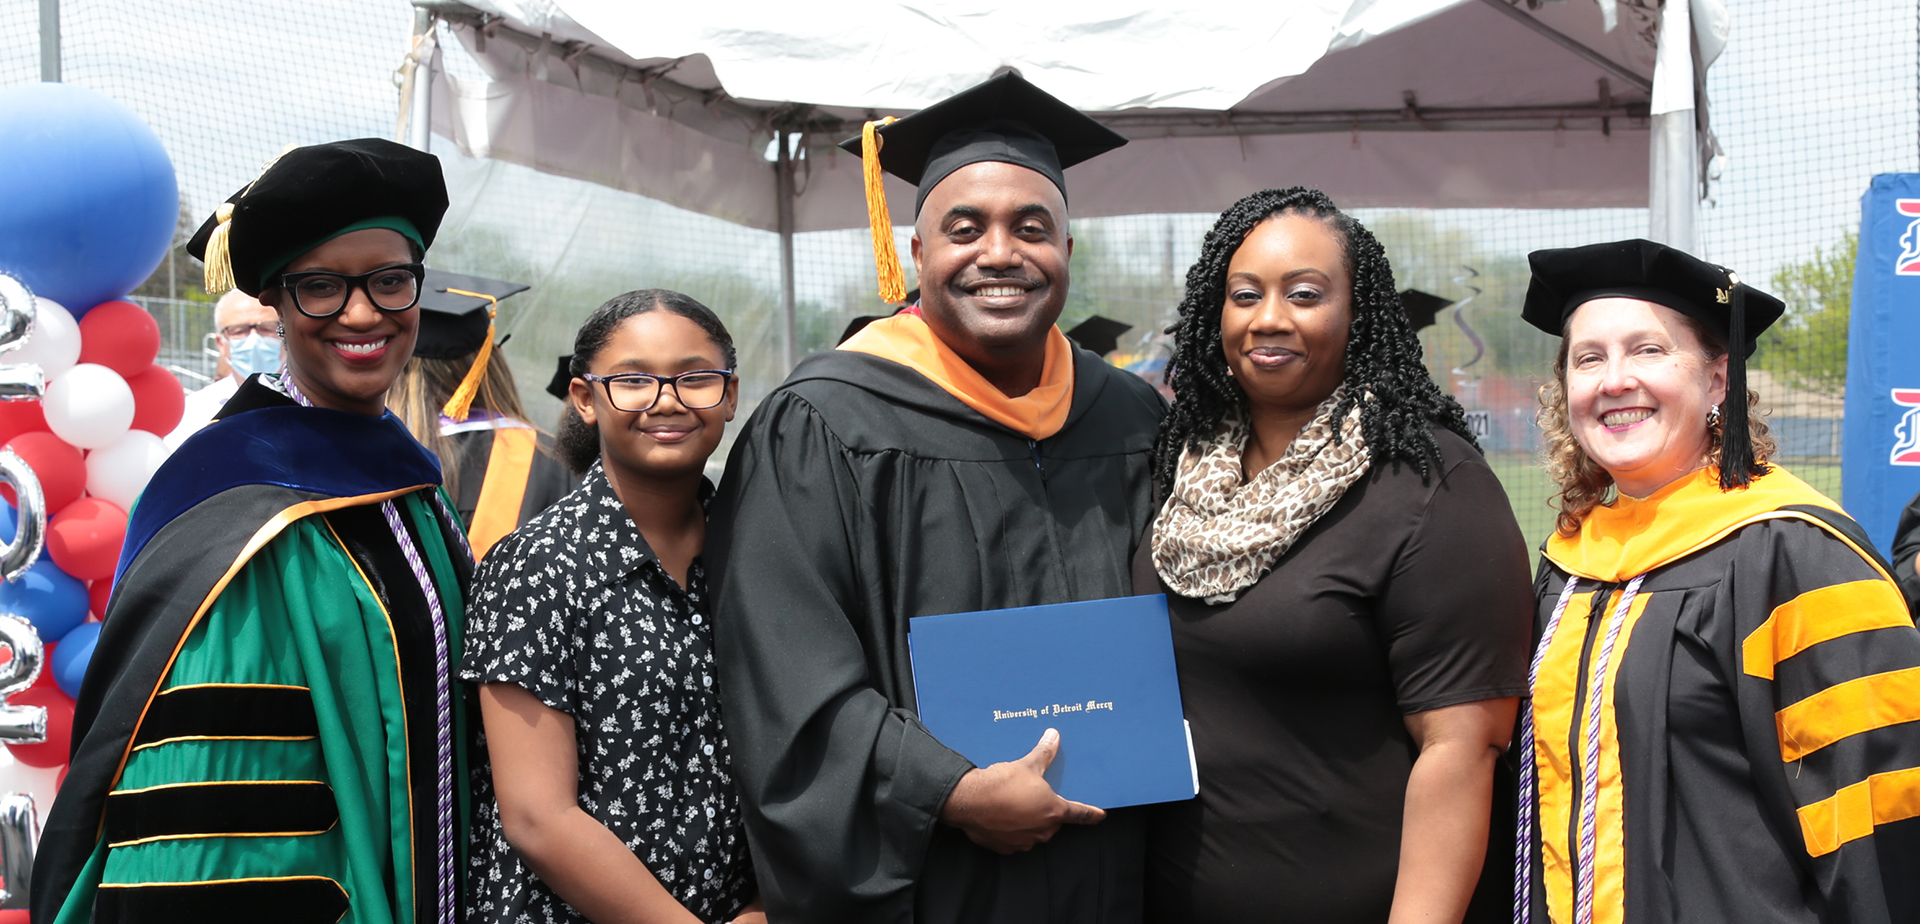 Graduate smiles with his family at on-campus celebration.